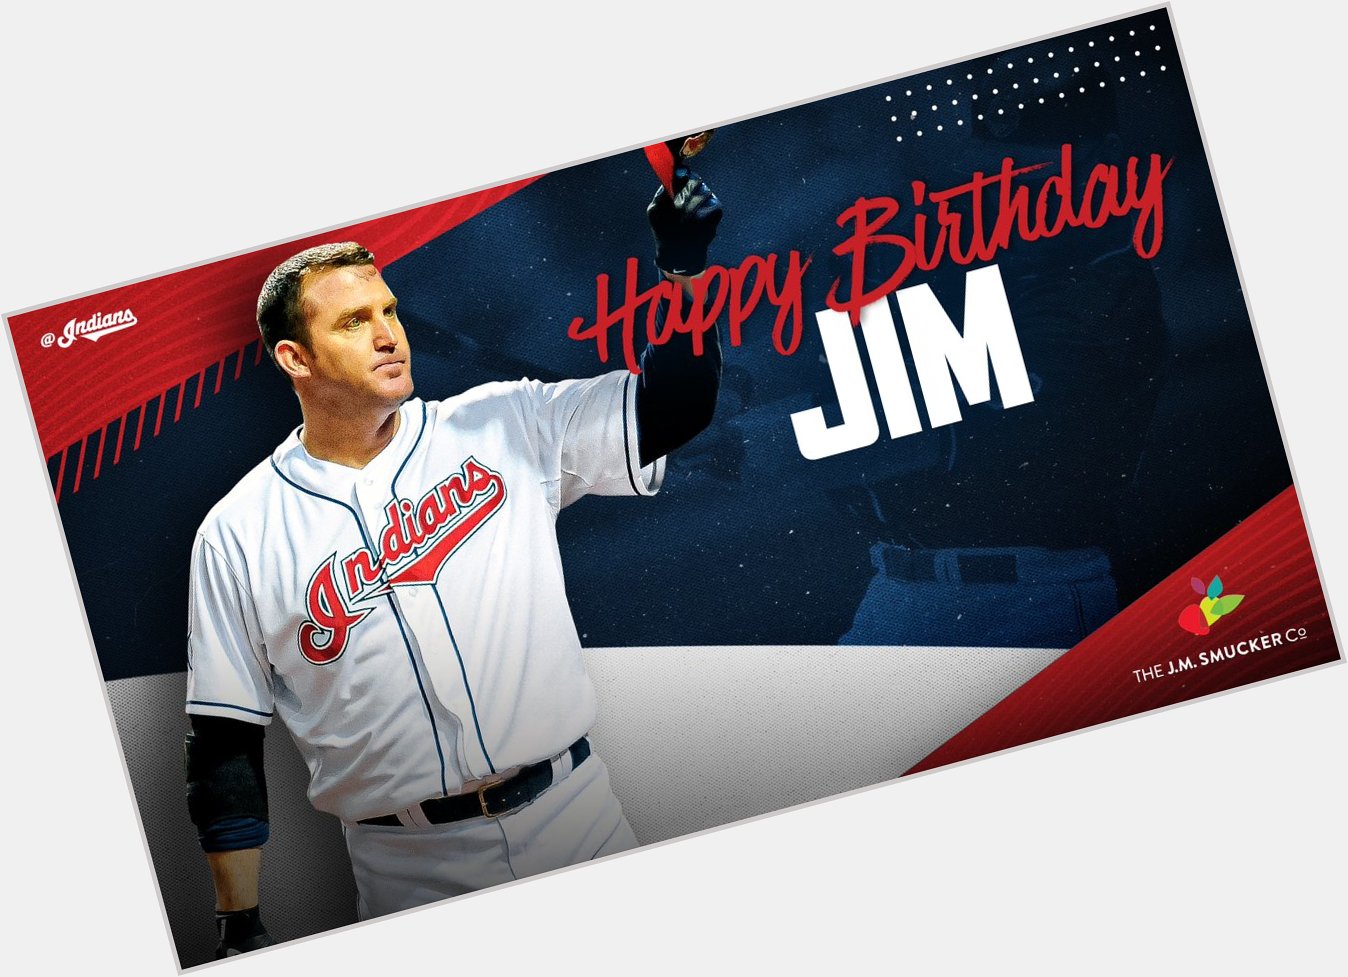 Happy Birthday to my all time favorite Indian Jim Thome! 